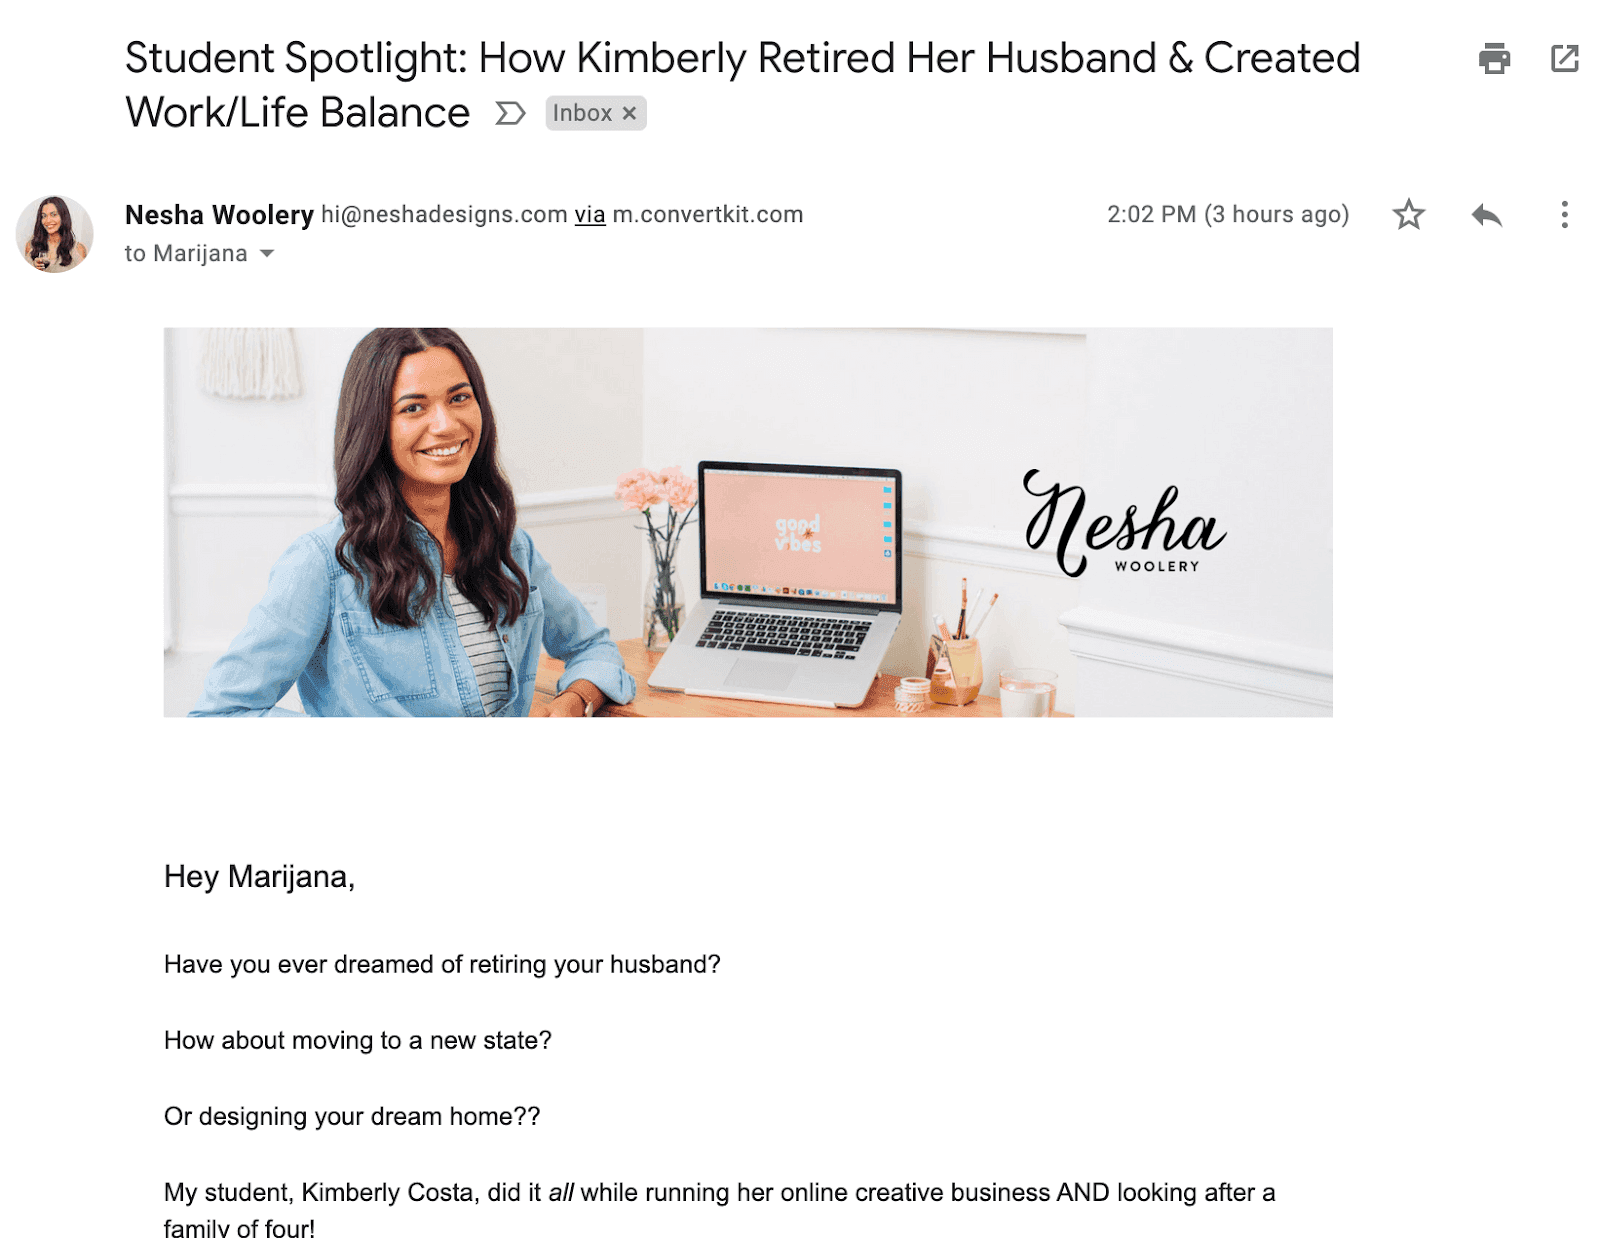 Student Spotlight example in an email newsletter